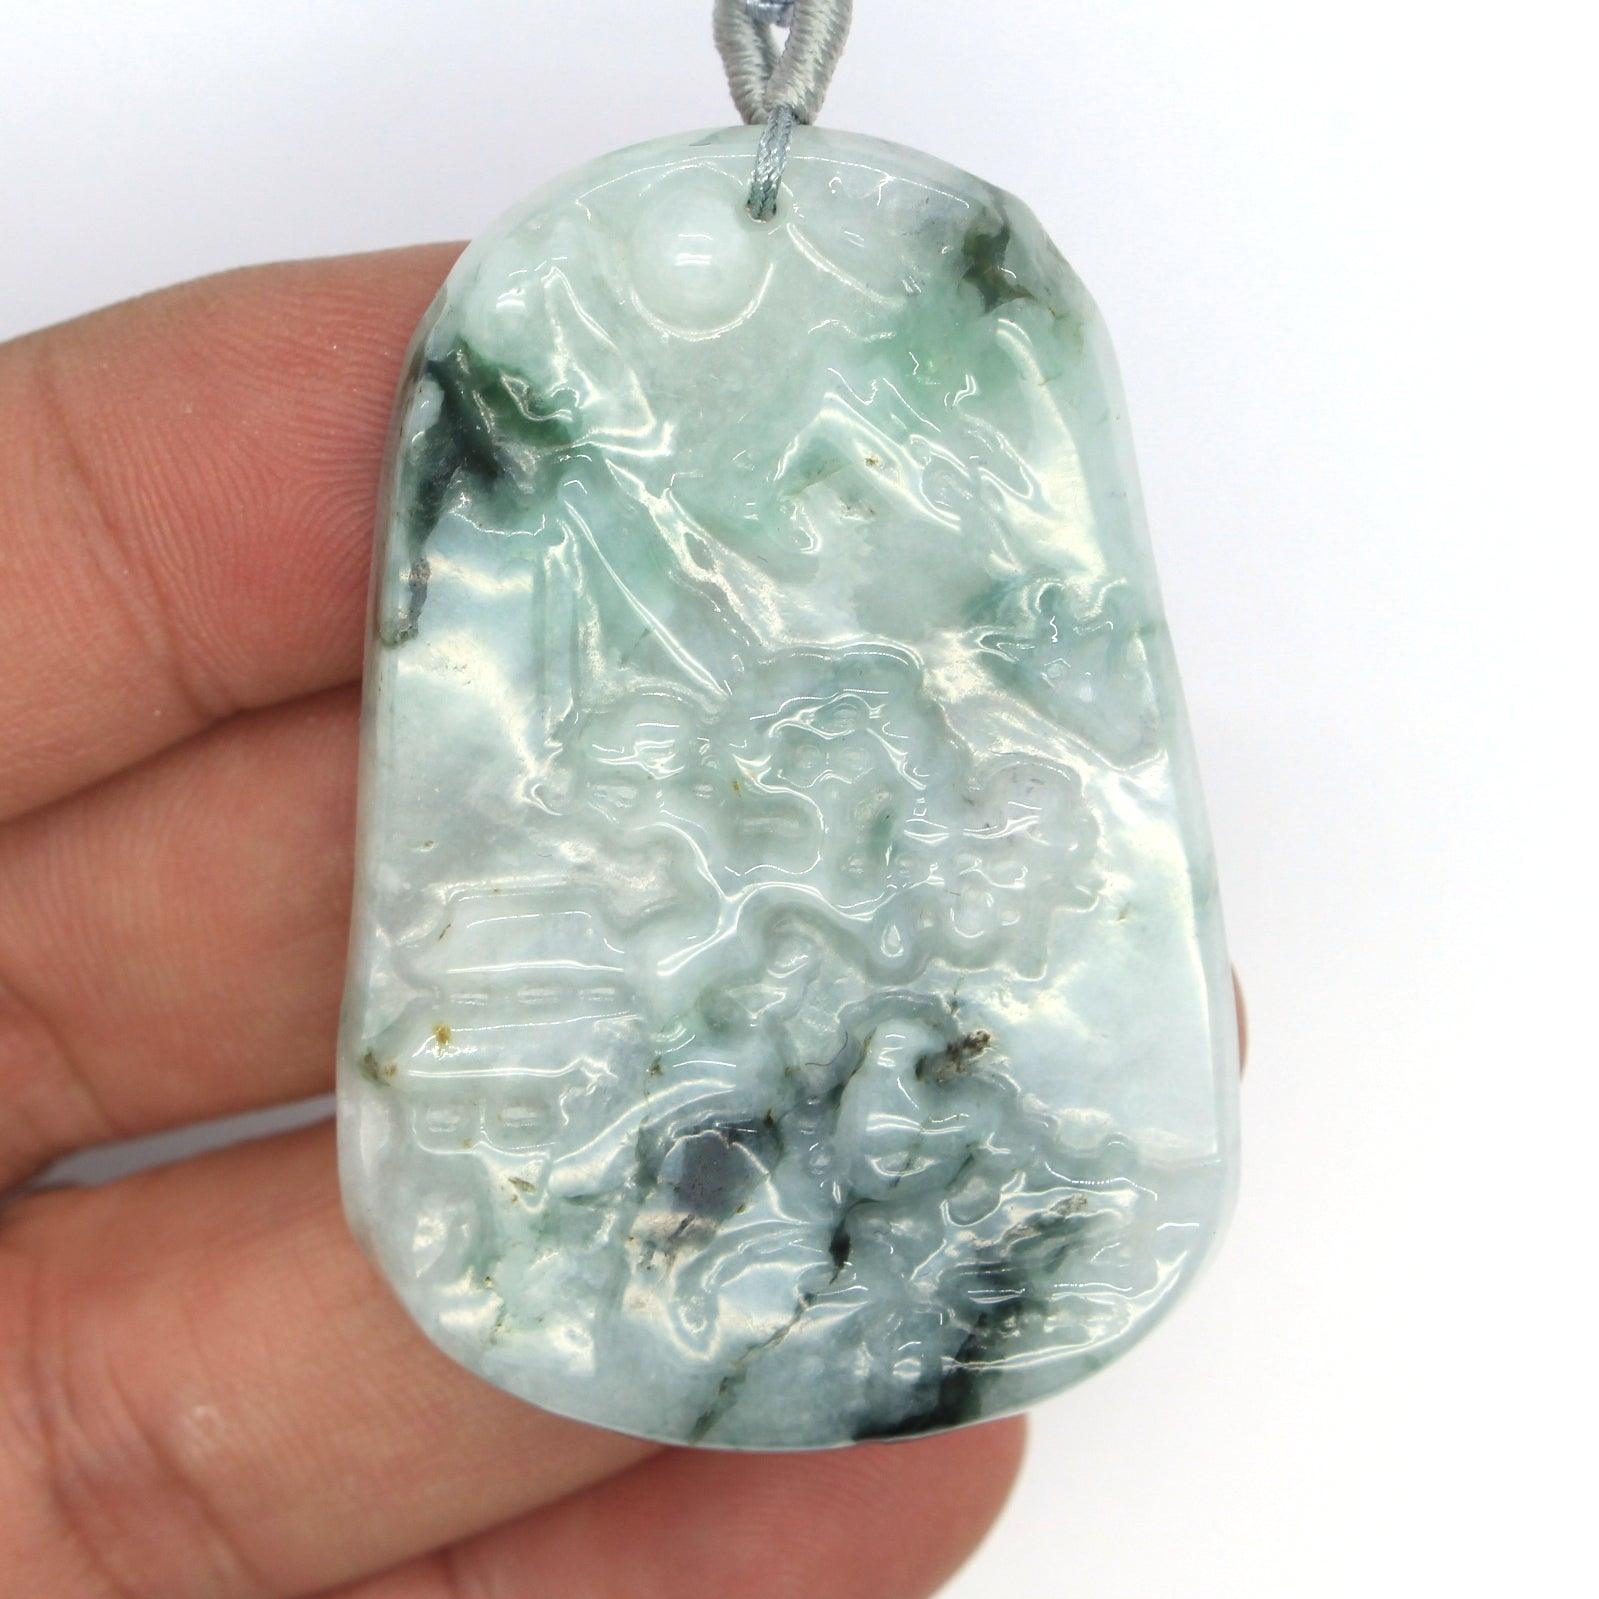 Type A Jadeite Jade Pendants Landscape Series (Fullfill USA only) B08N4WRQWM - Jade-collector.com